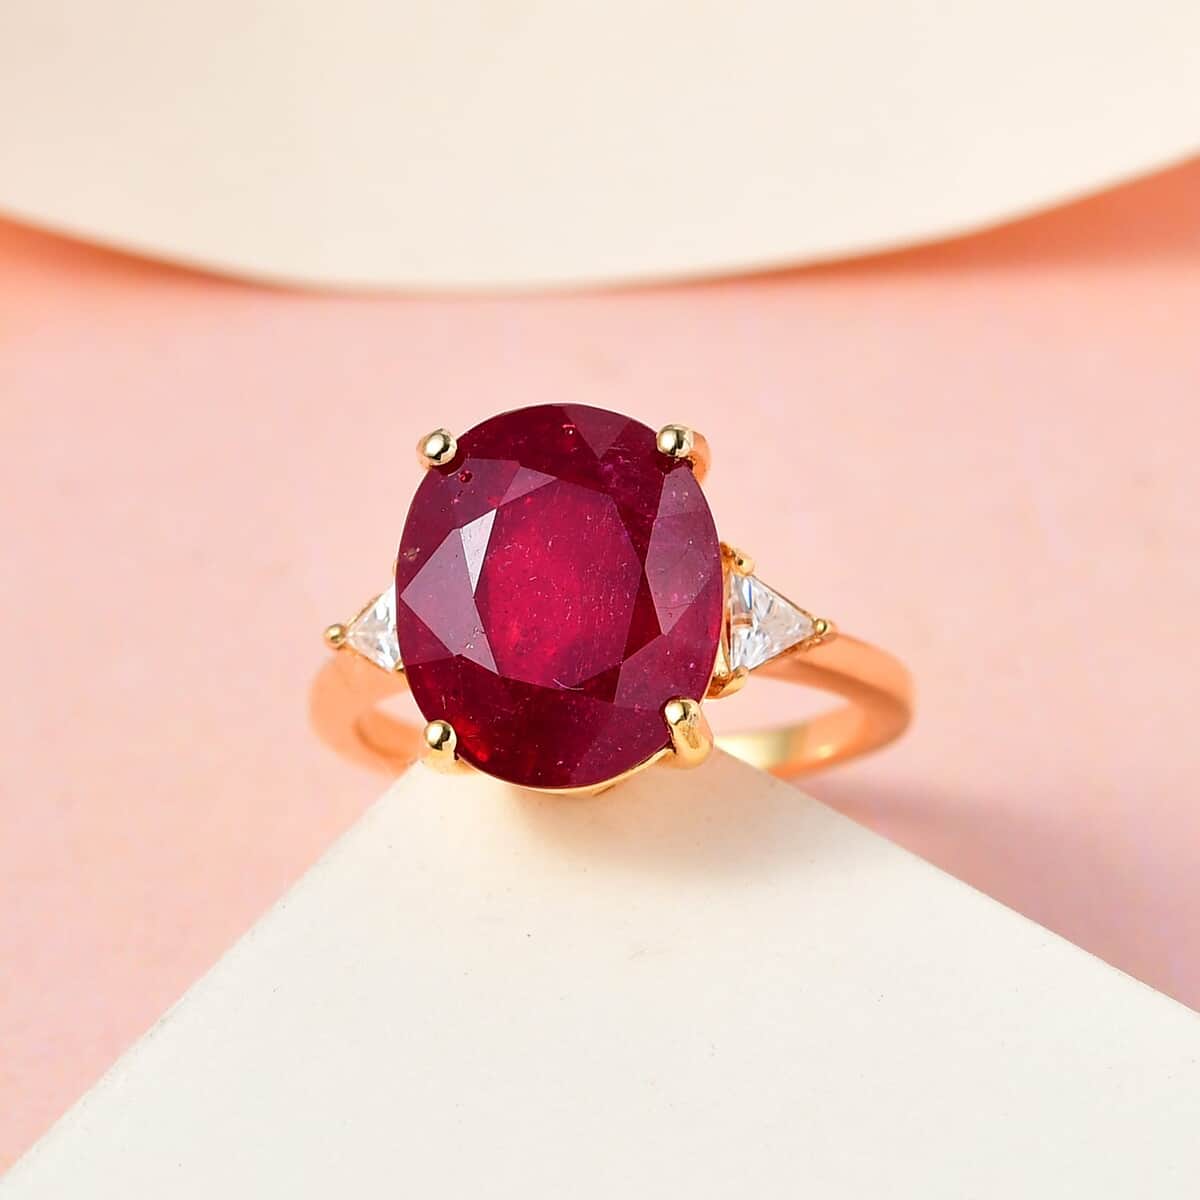 niassa-ruby-and-moissanite-ring-in-vermeil-yellow-gold-over-sterling-silver-size-10.0-7.10-ctw image number 1